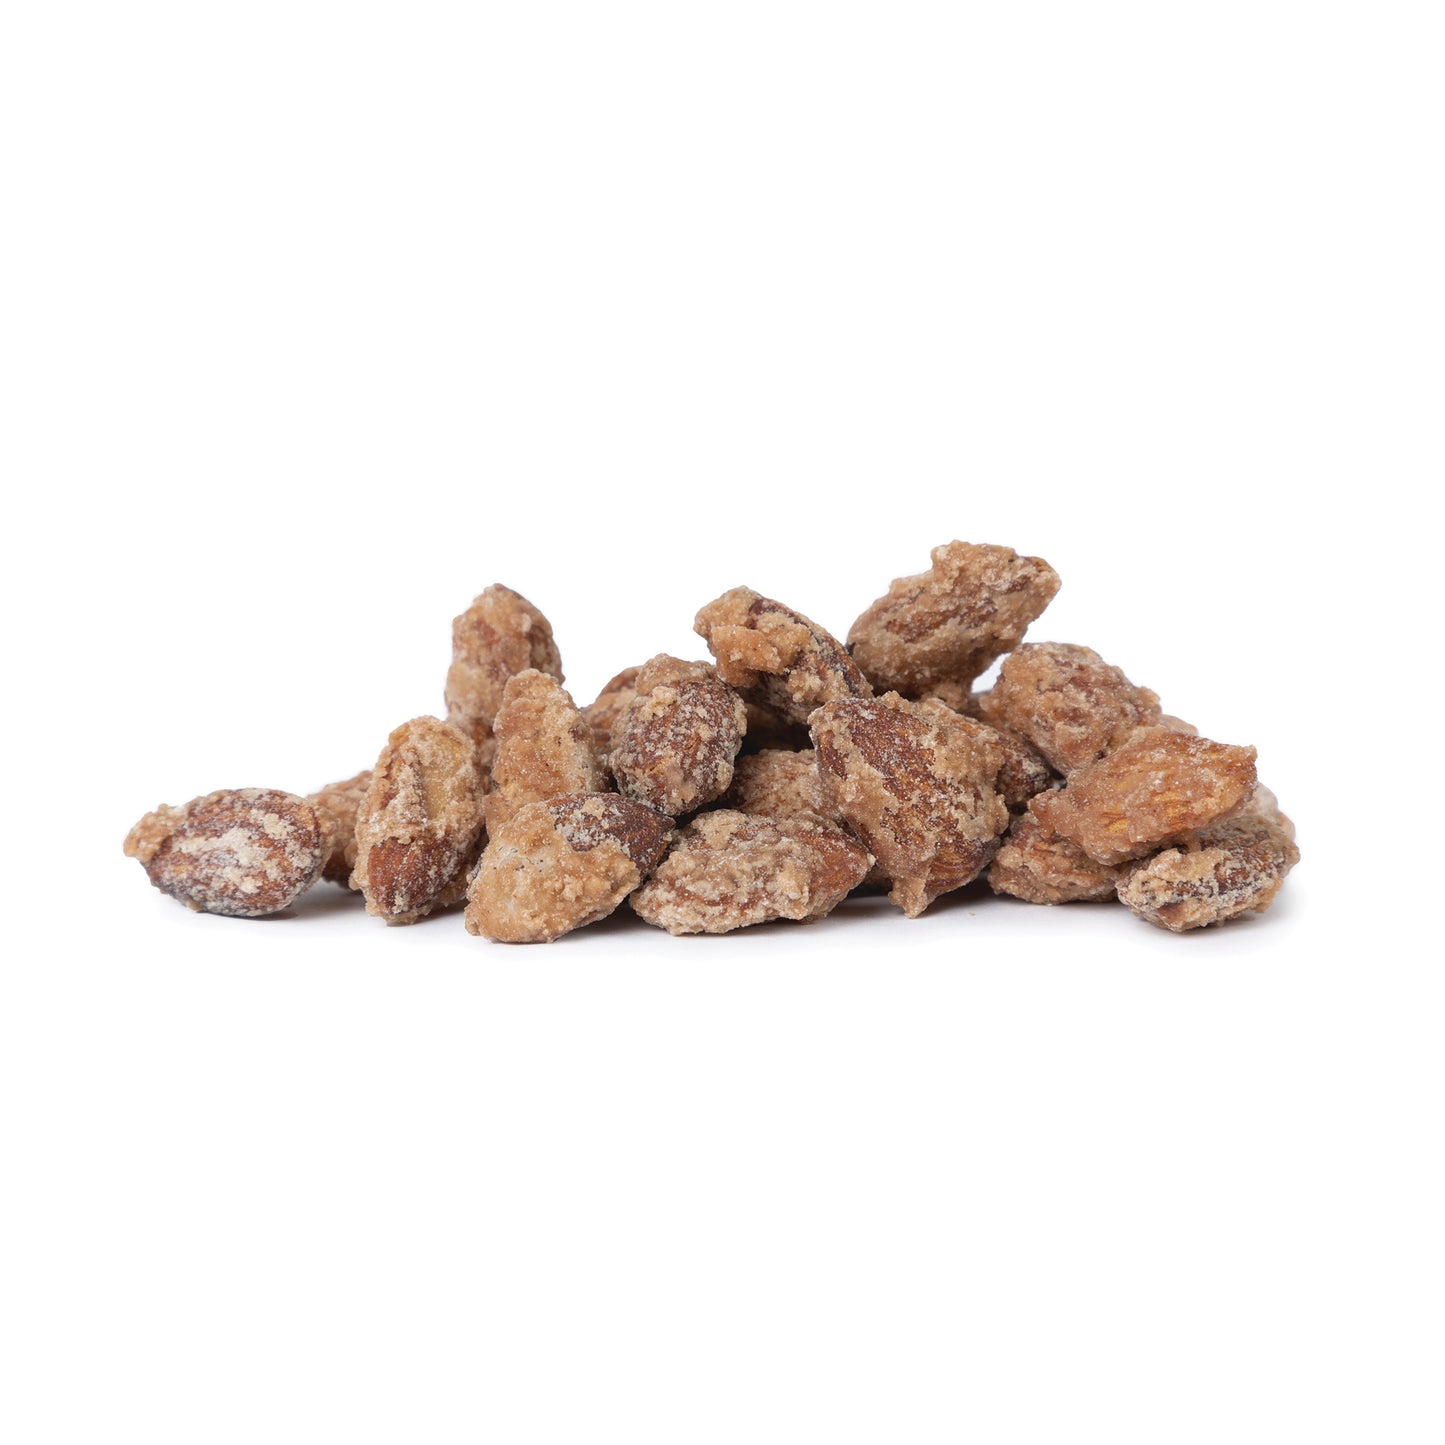 Cinnamon Frosted Almonds. 8oz